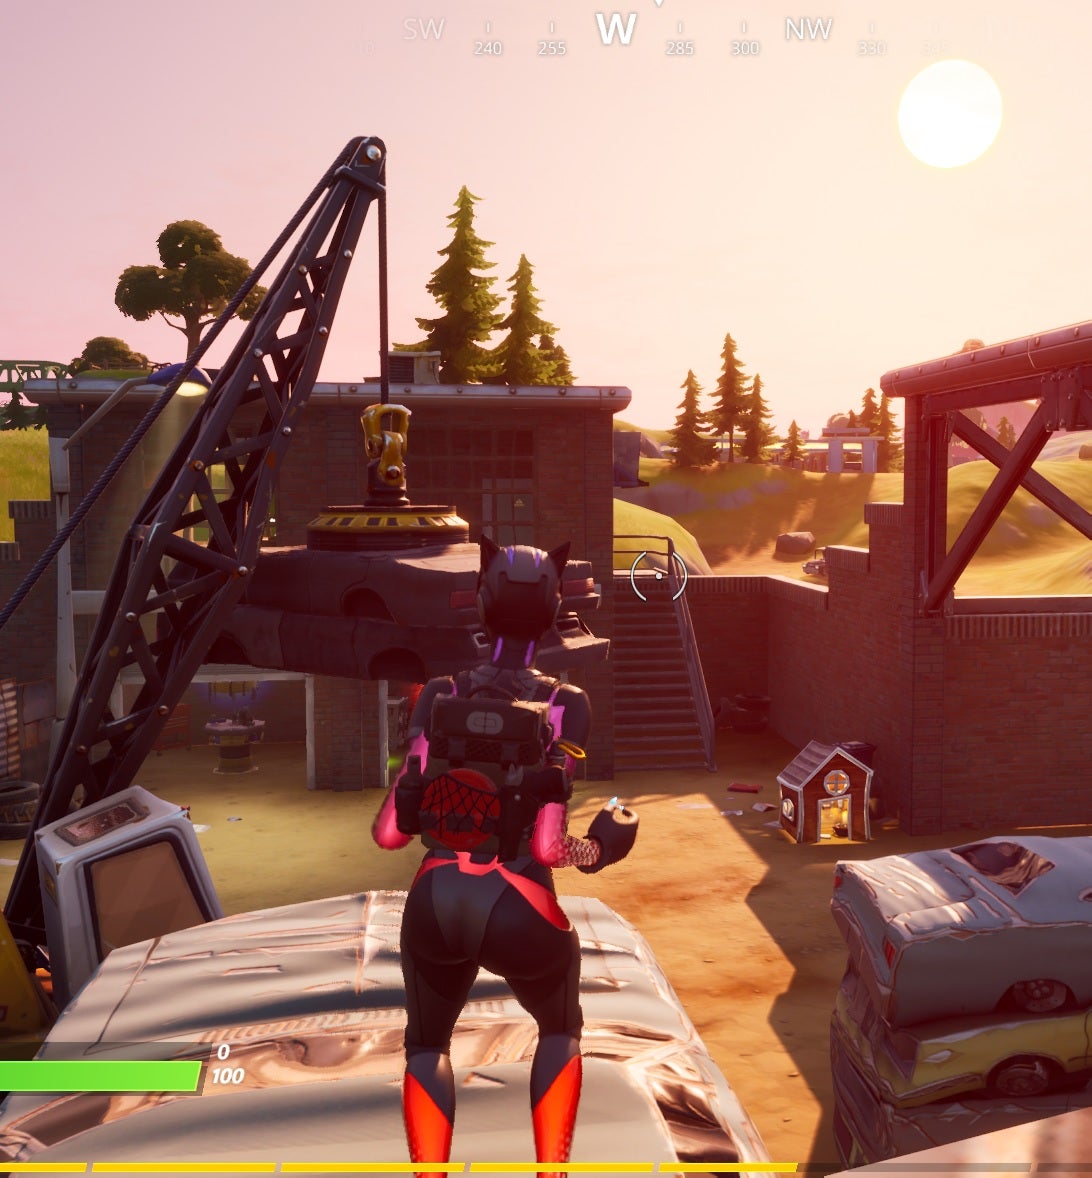 Image for Fortnite: Chapter 2 - Dance at compact cars, Lockie's lighthouse and a weather station